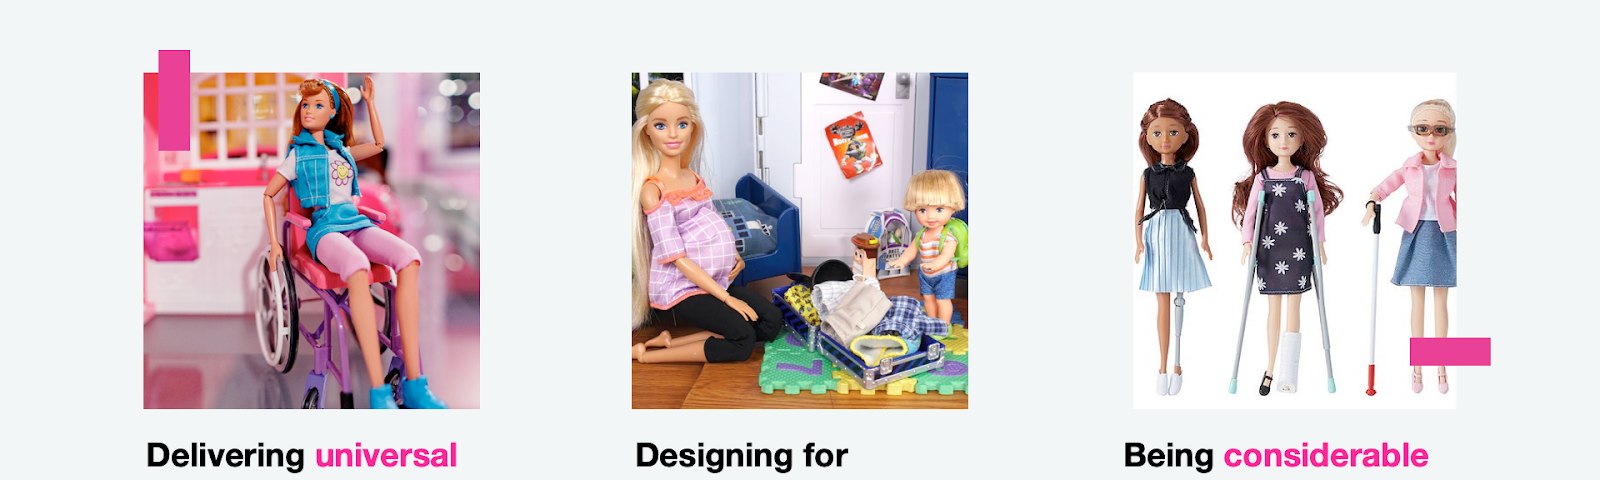 An image of a Barbie in a wheelchair, caption: Delivering universal experiences, removing all barriers, blockers, and challenges. An image of a pregnant Barbie with a child, packing a suitcase, caption: Designing for everyone, anyone can enjoy your product or service. Three Barbies, one missing a leg, another on crutches, a third one blind, caption: Being considerable and caring, embrace diversity and respect the choice